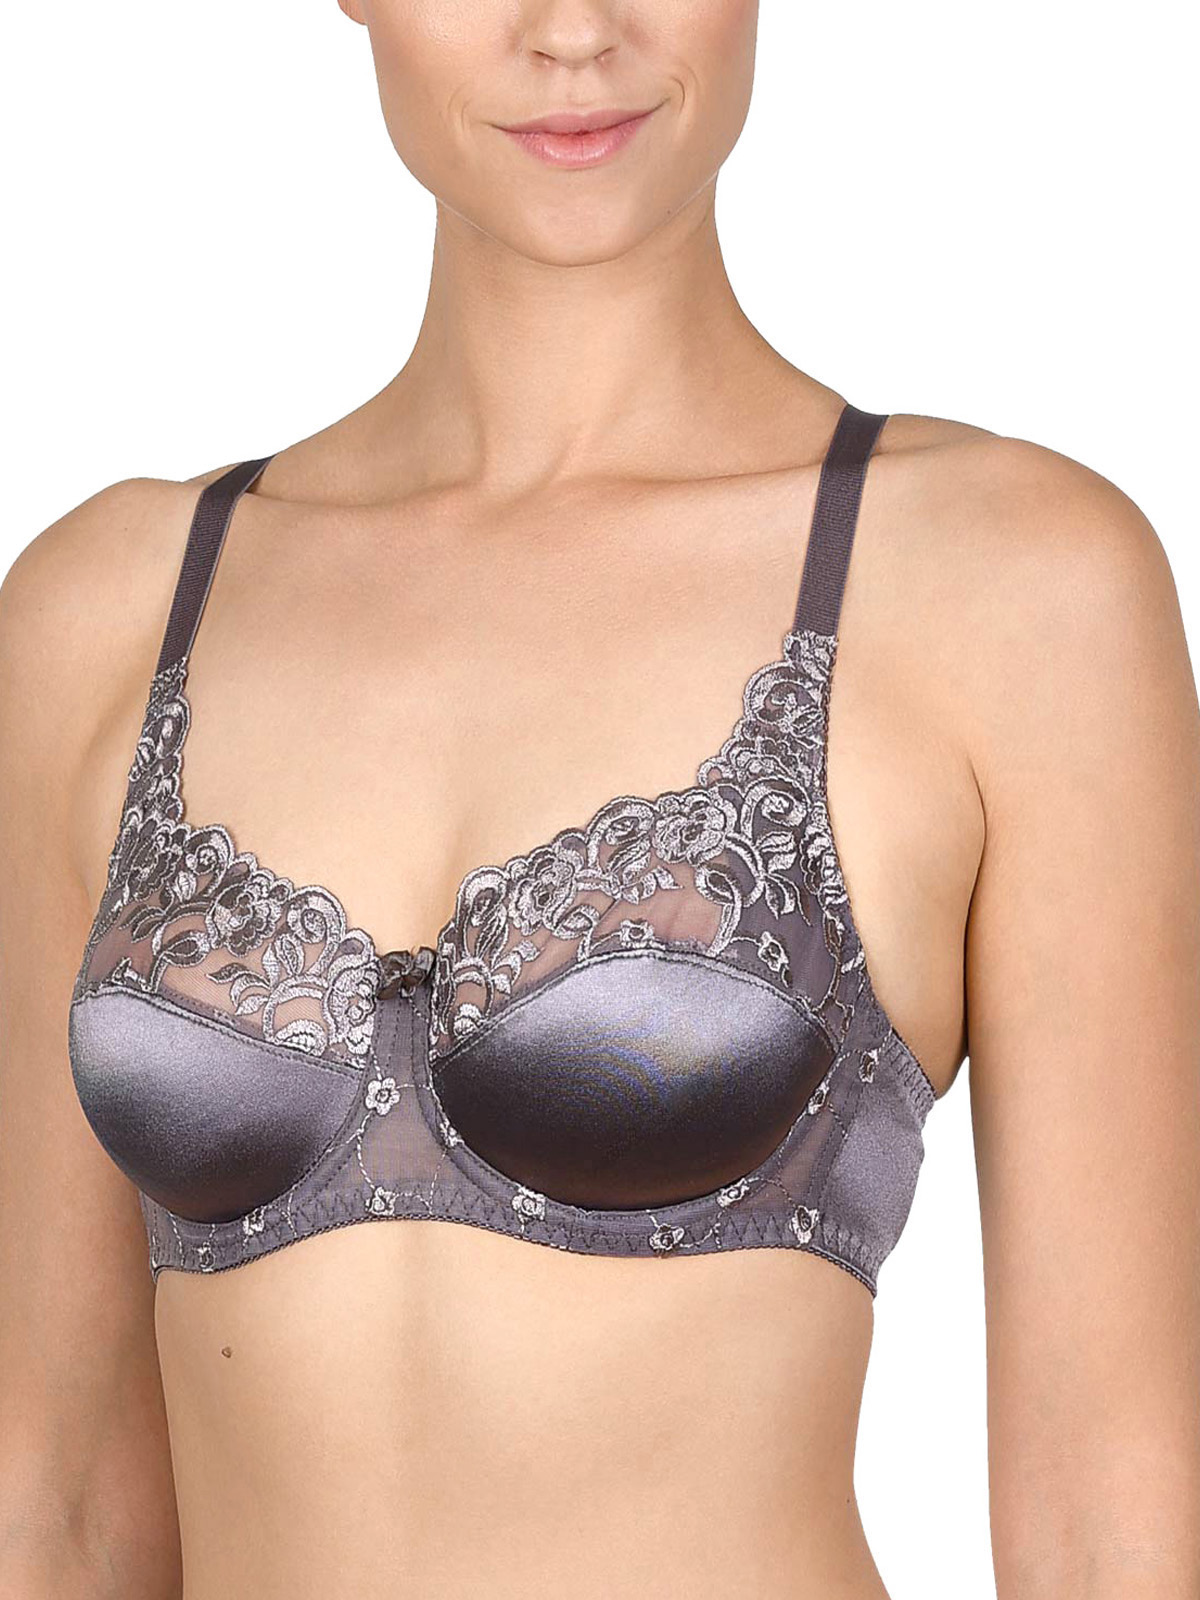 Naturana - - Naturana GREY SILK Embroidered Tulle Lace Underwired Satin Bra  - Size 34 to 46 (